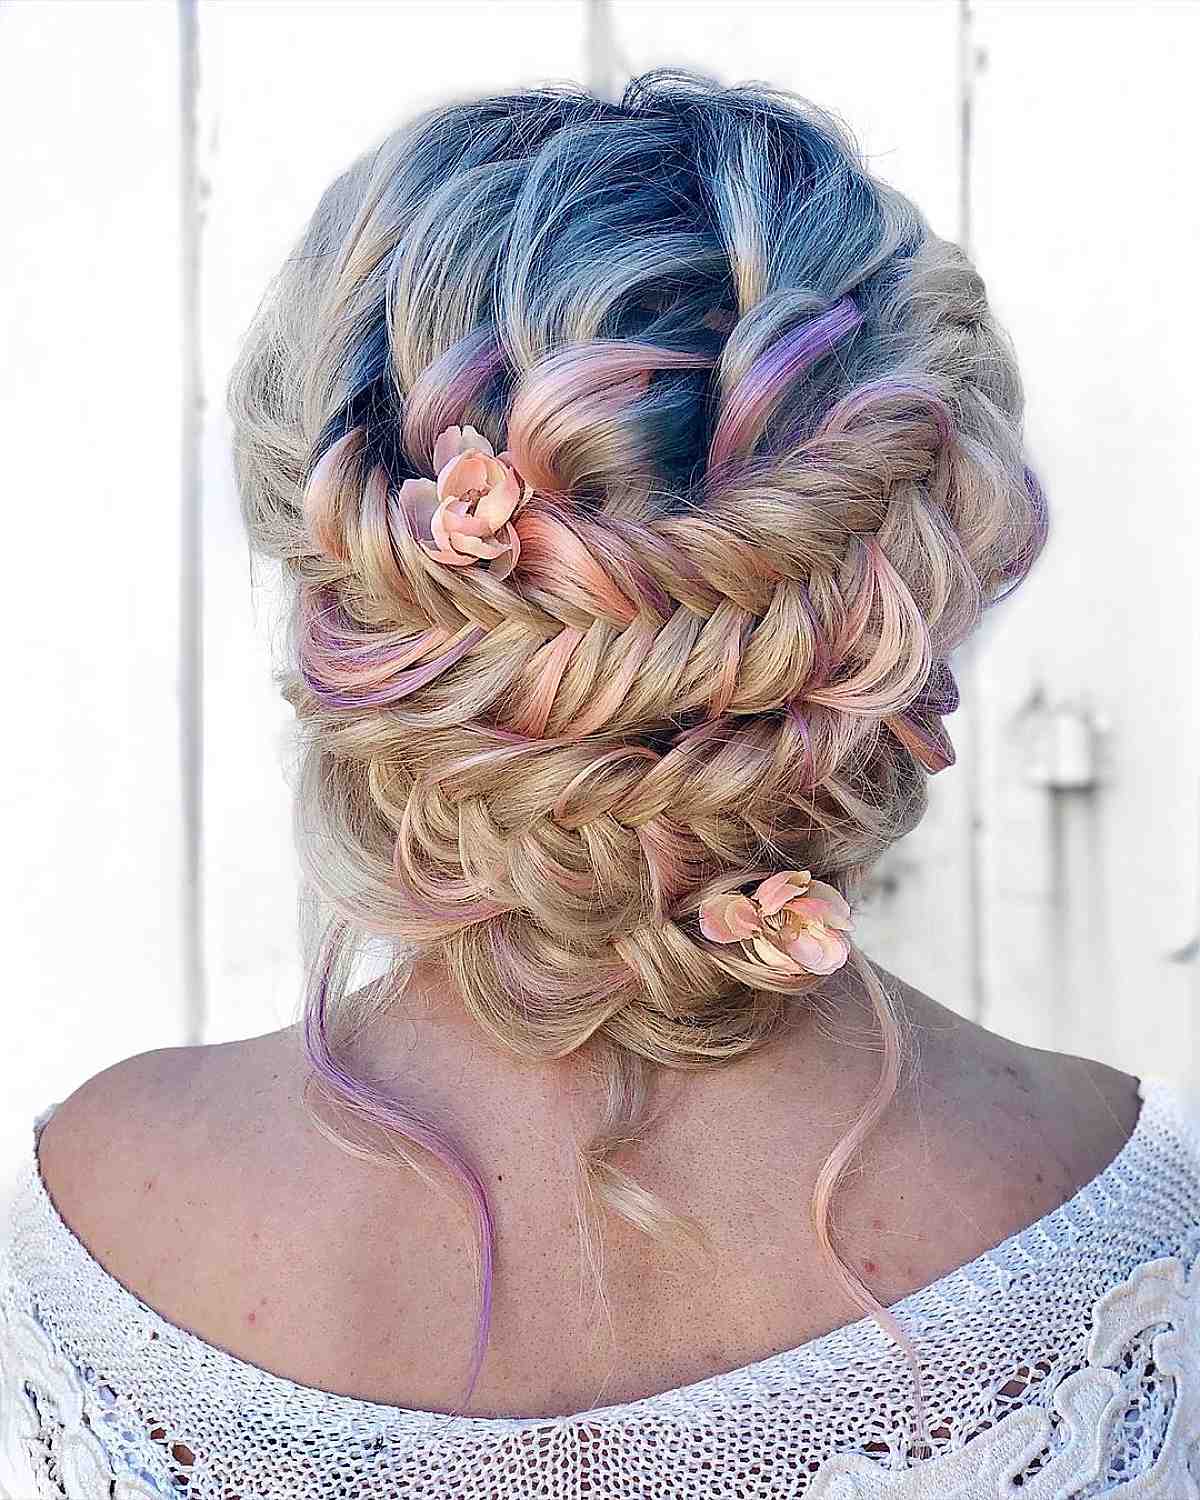 21 Gorgeous Bridesmaid Hairstyles for The Brides Big Day